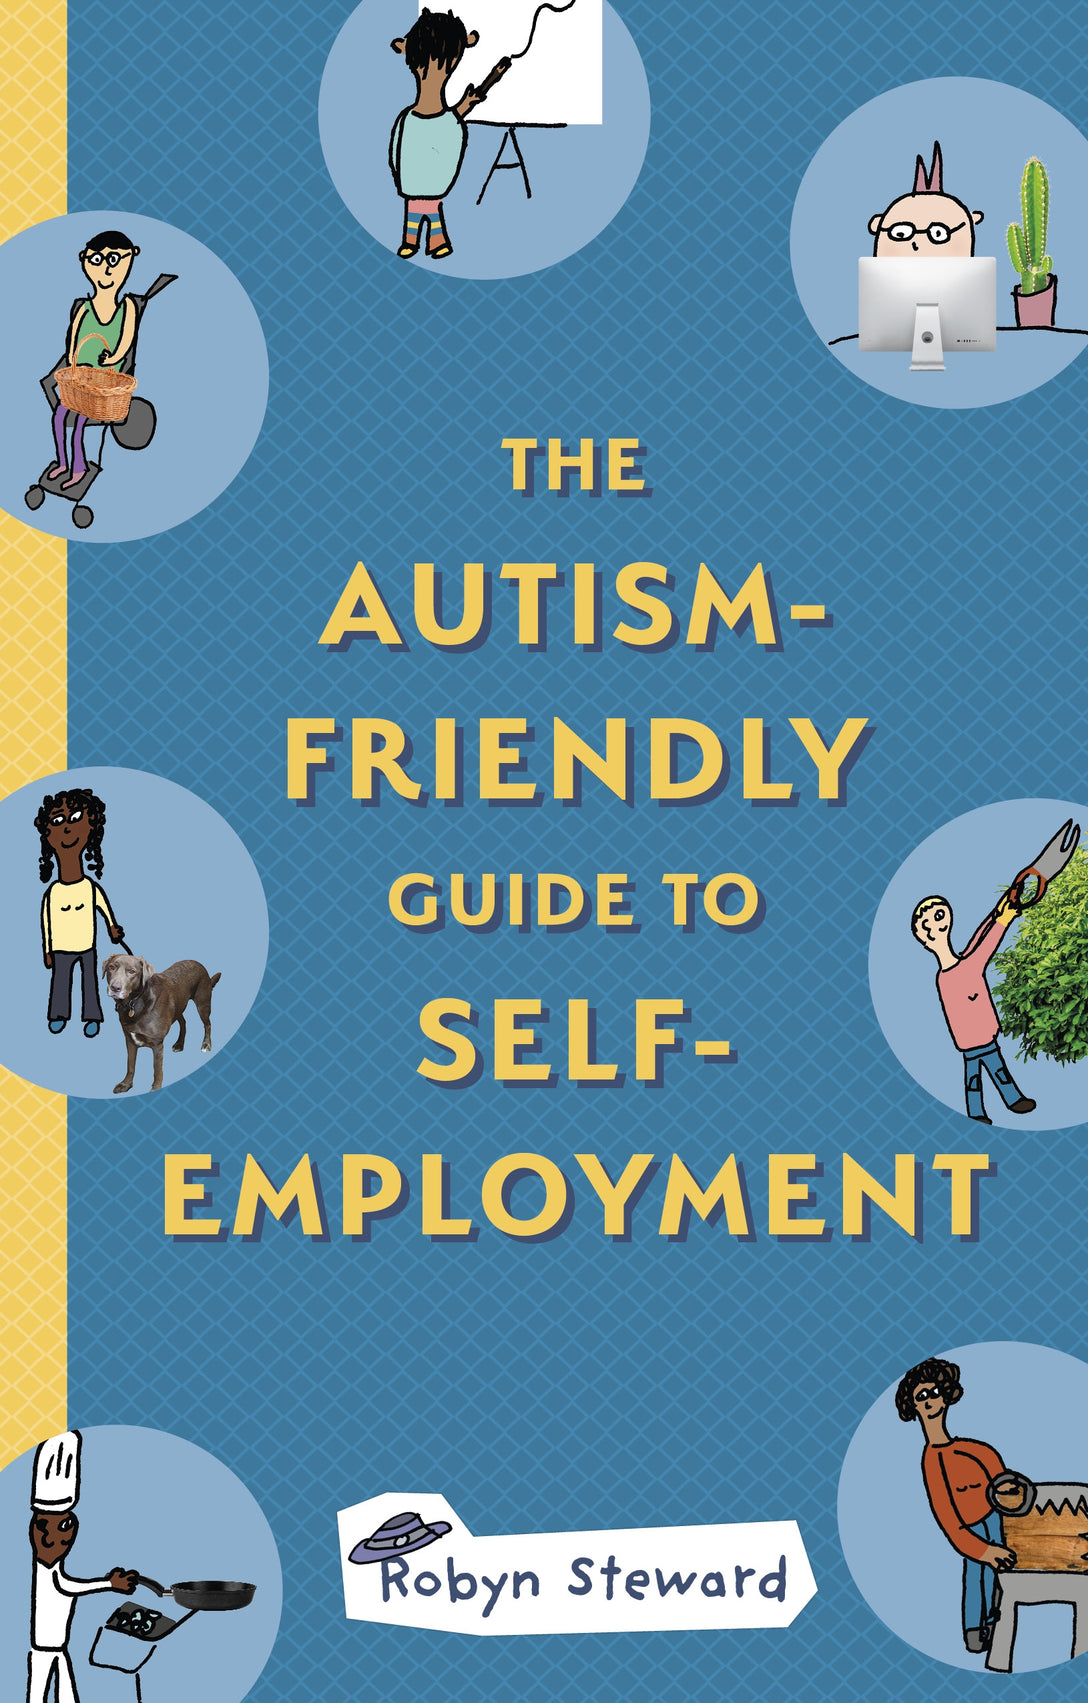 The Autism-Friendly Guide to Self-Employment by Robyn Steward